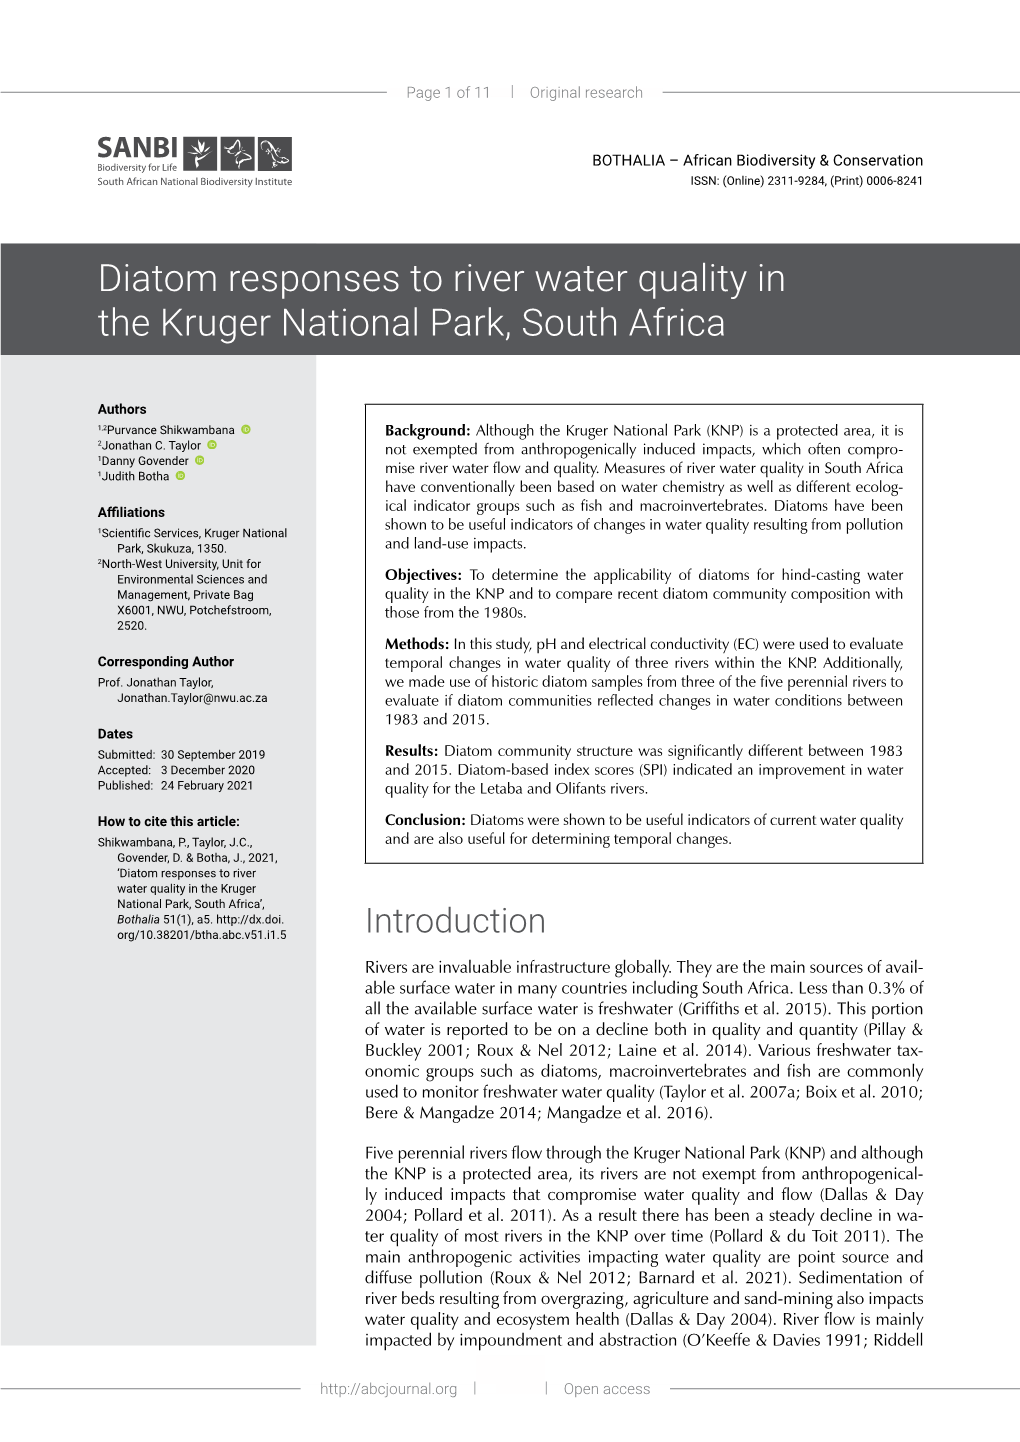 Diatom Responses to River Water Quality in the Kruger National Park, South Africa